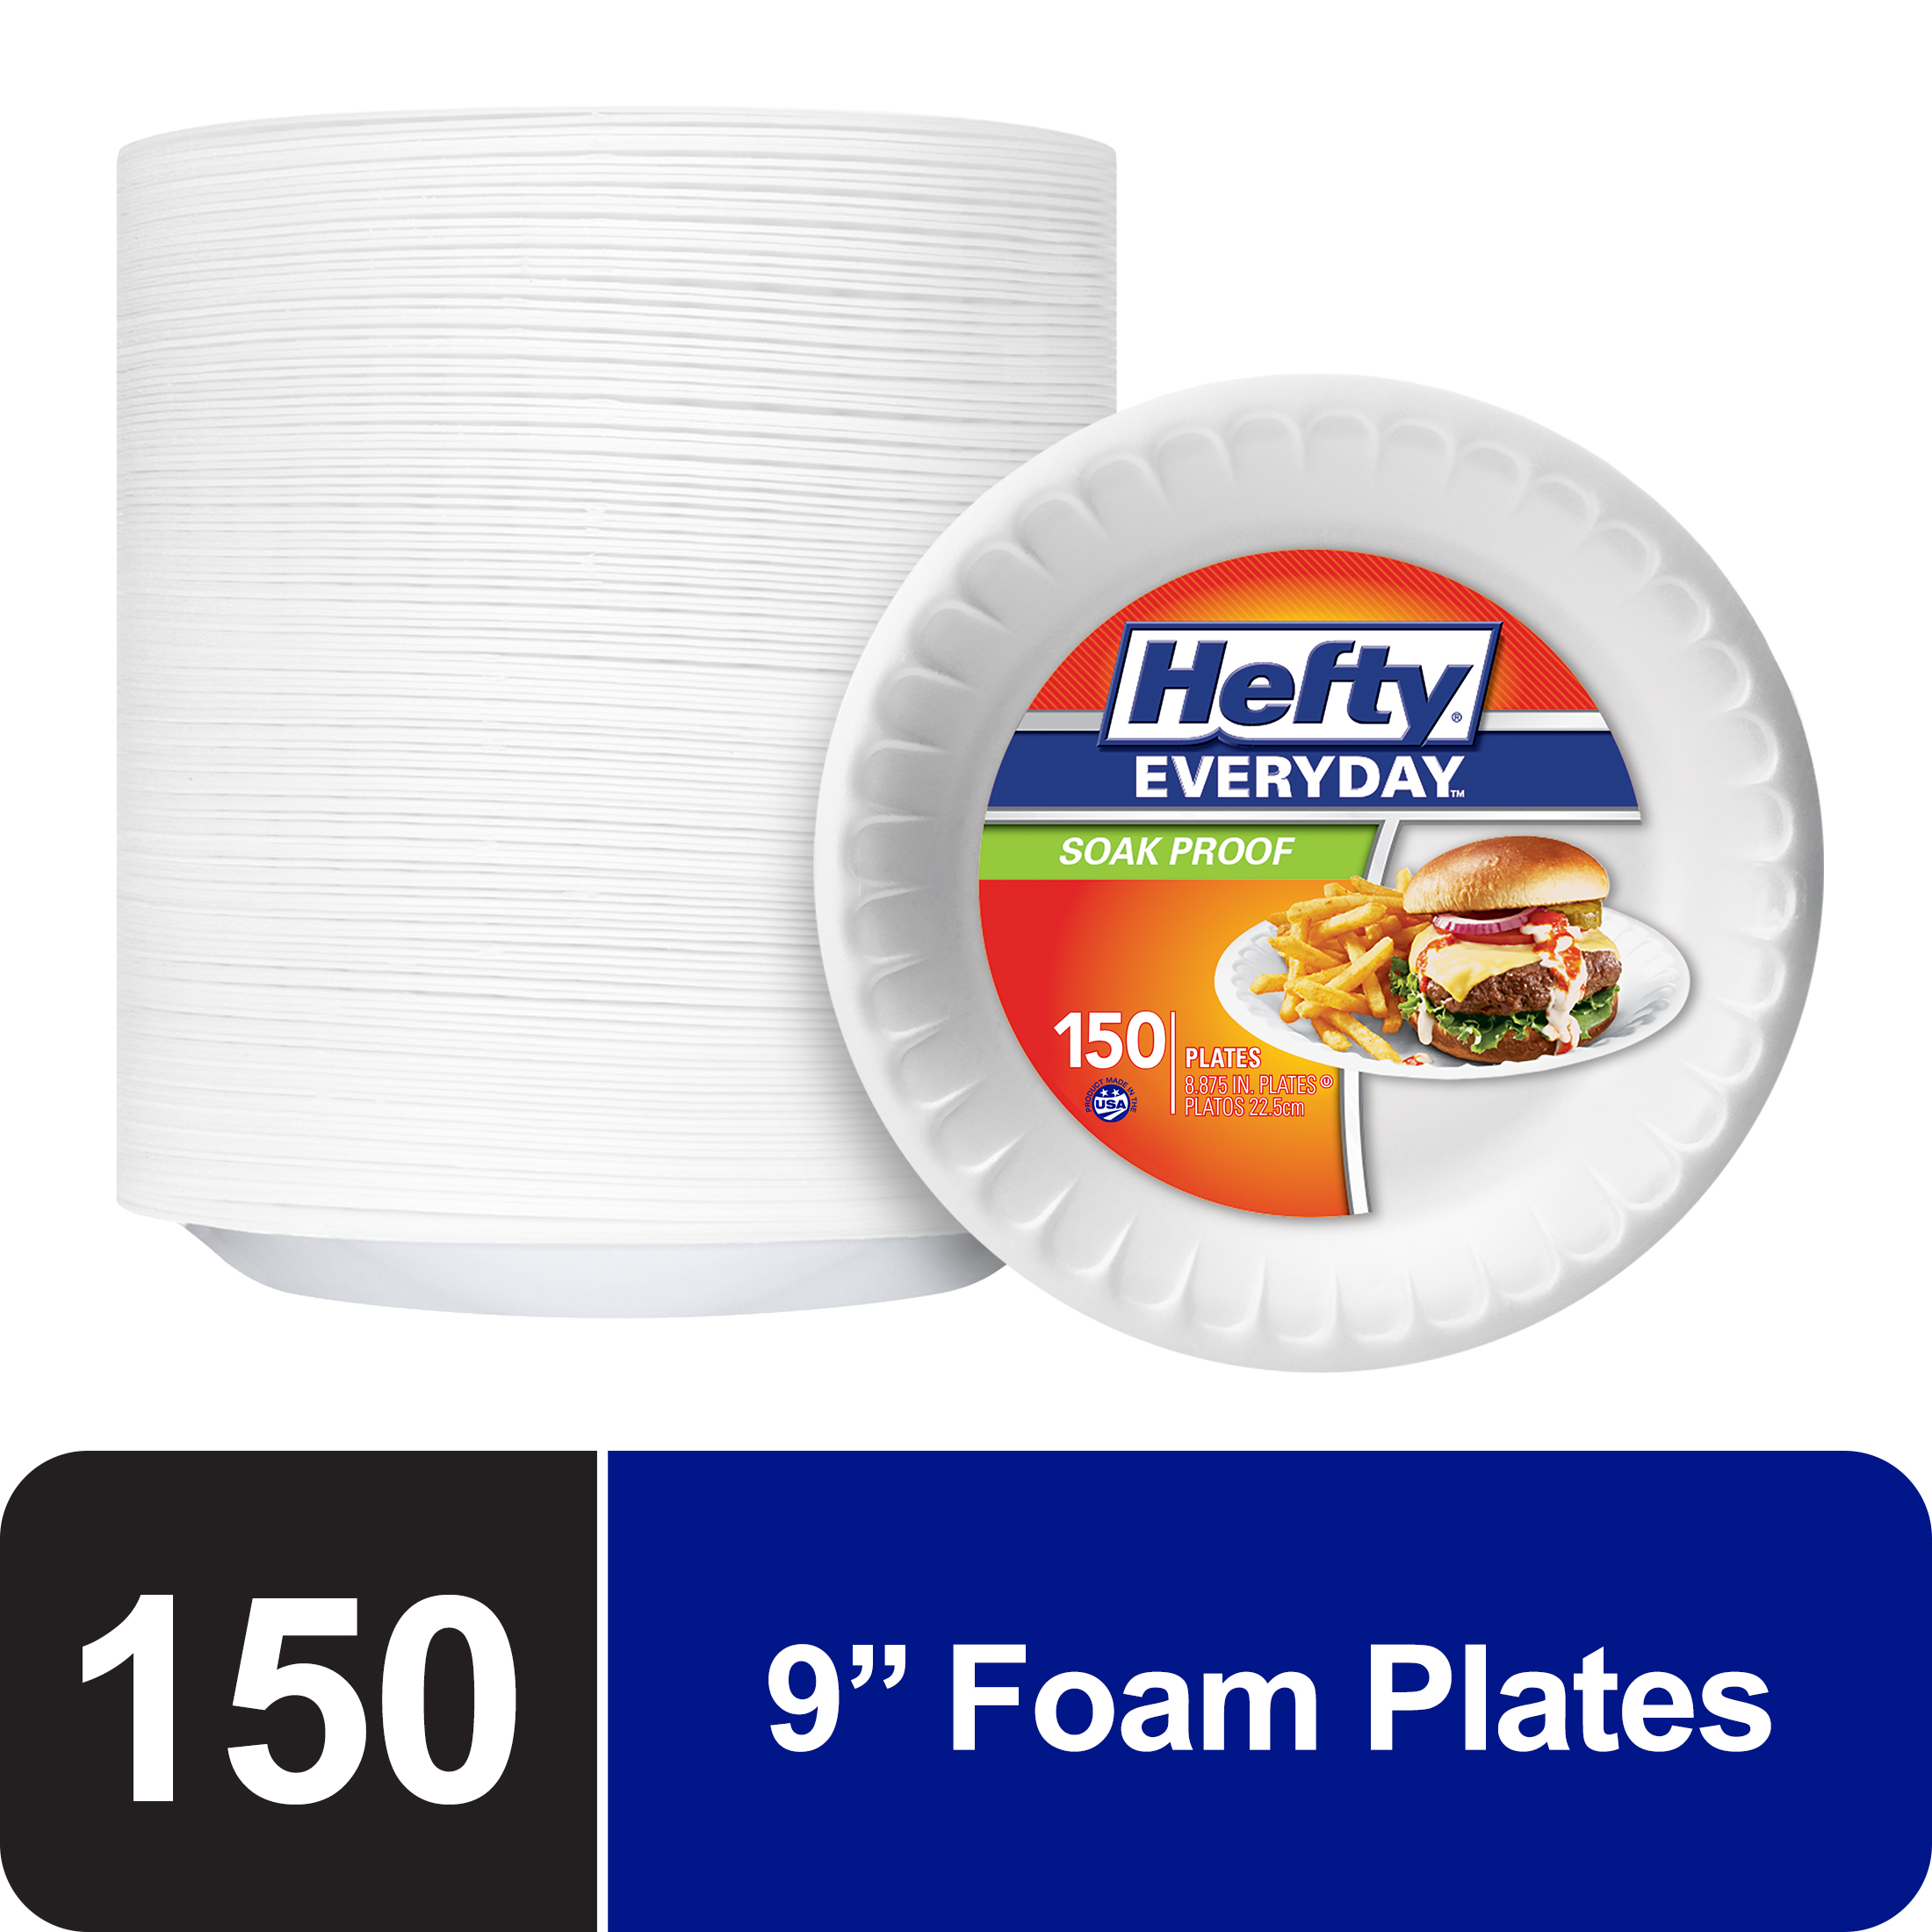 Hefty Everyday Soak-Proof Foam Plates, White, 9 Inch, 150 Count - image 1 of 5